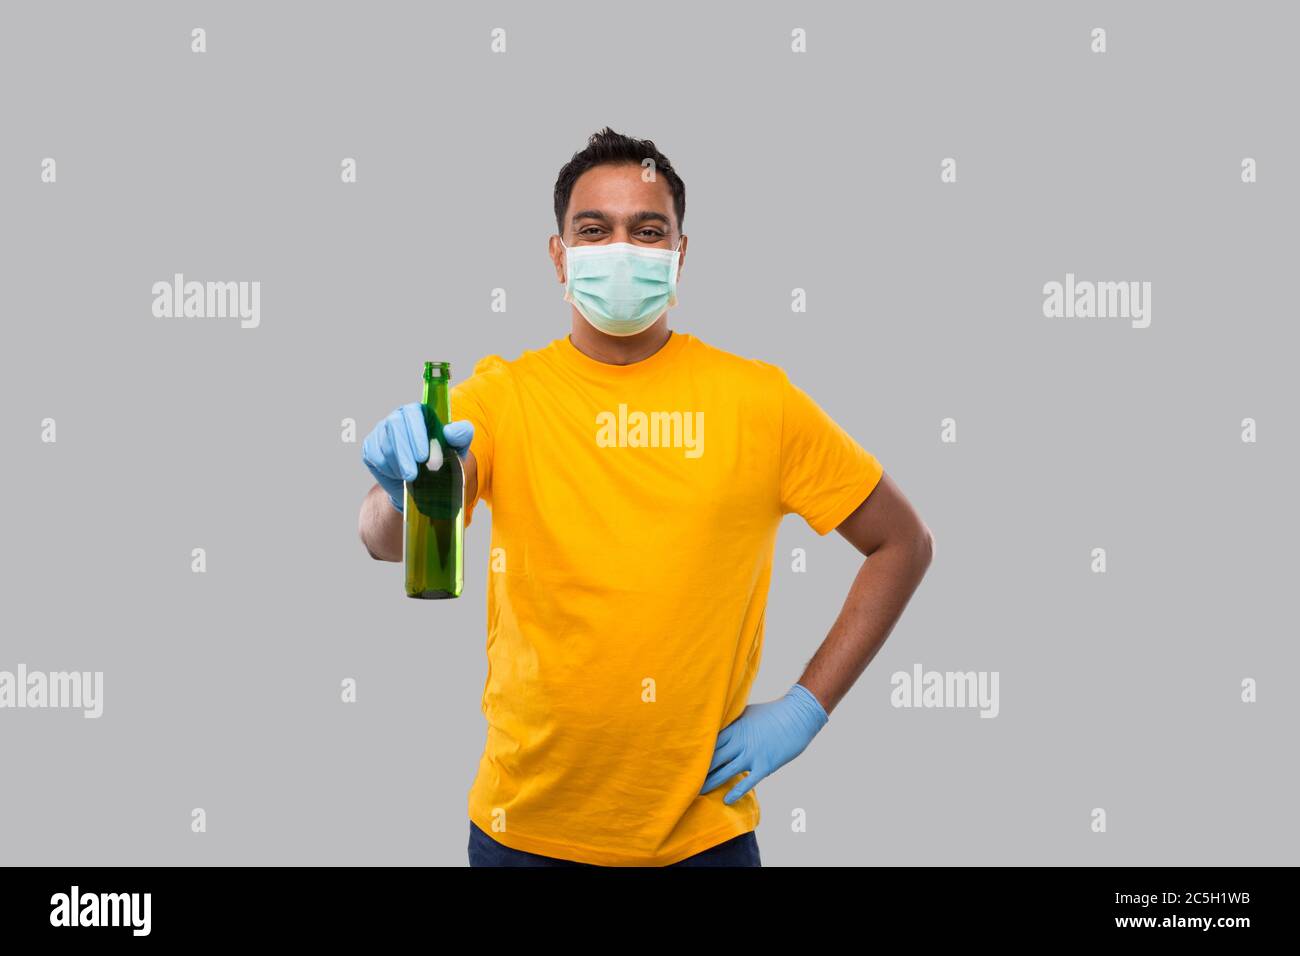 Indian man Holding Beer bottle Wearing Medical Mask and Gloves Isolated. Stock Photo